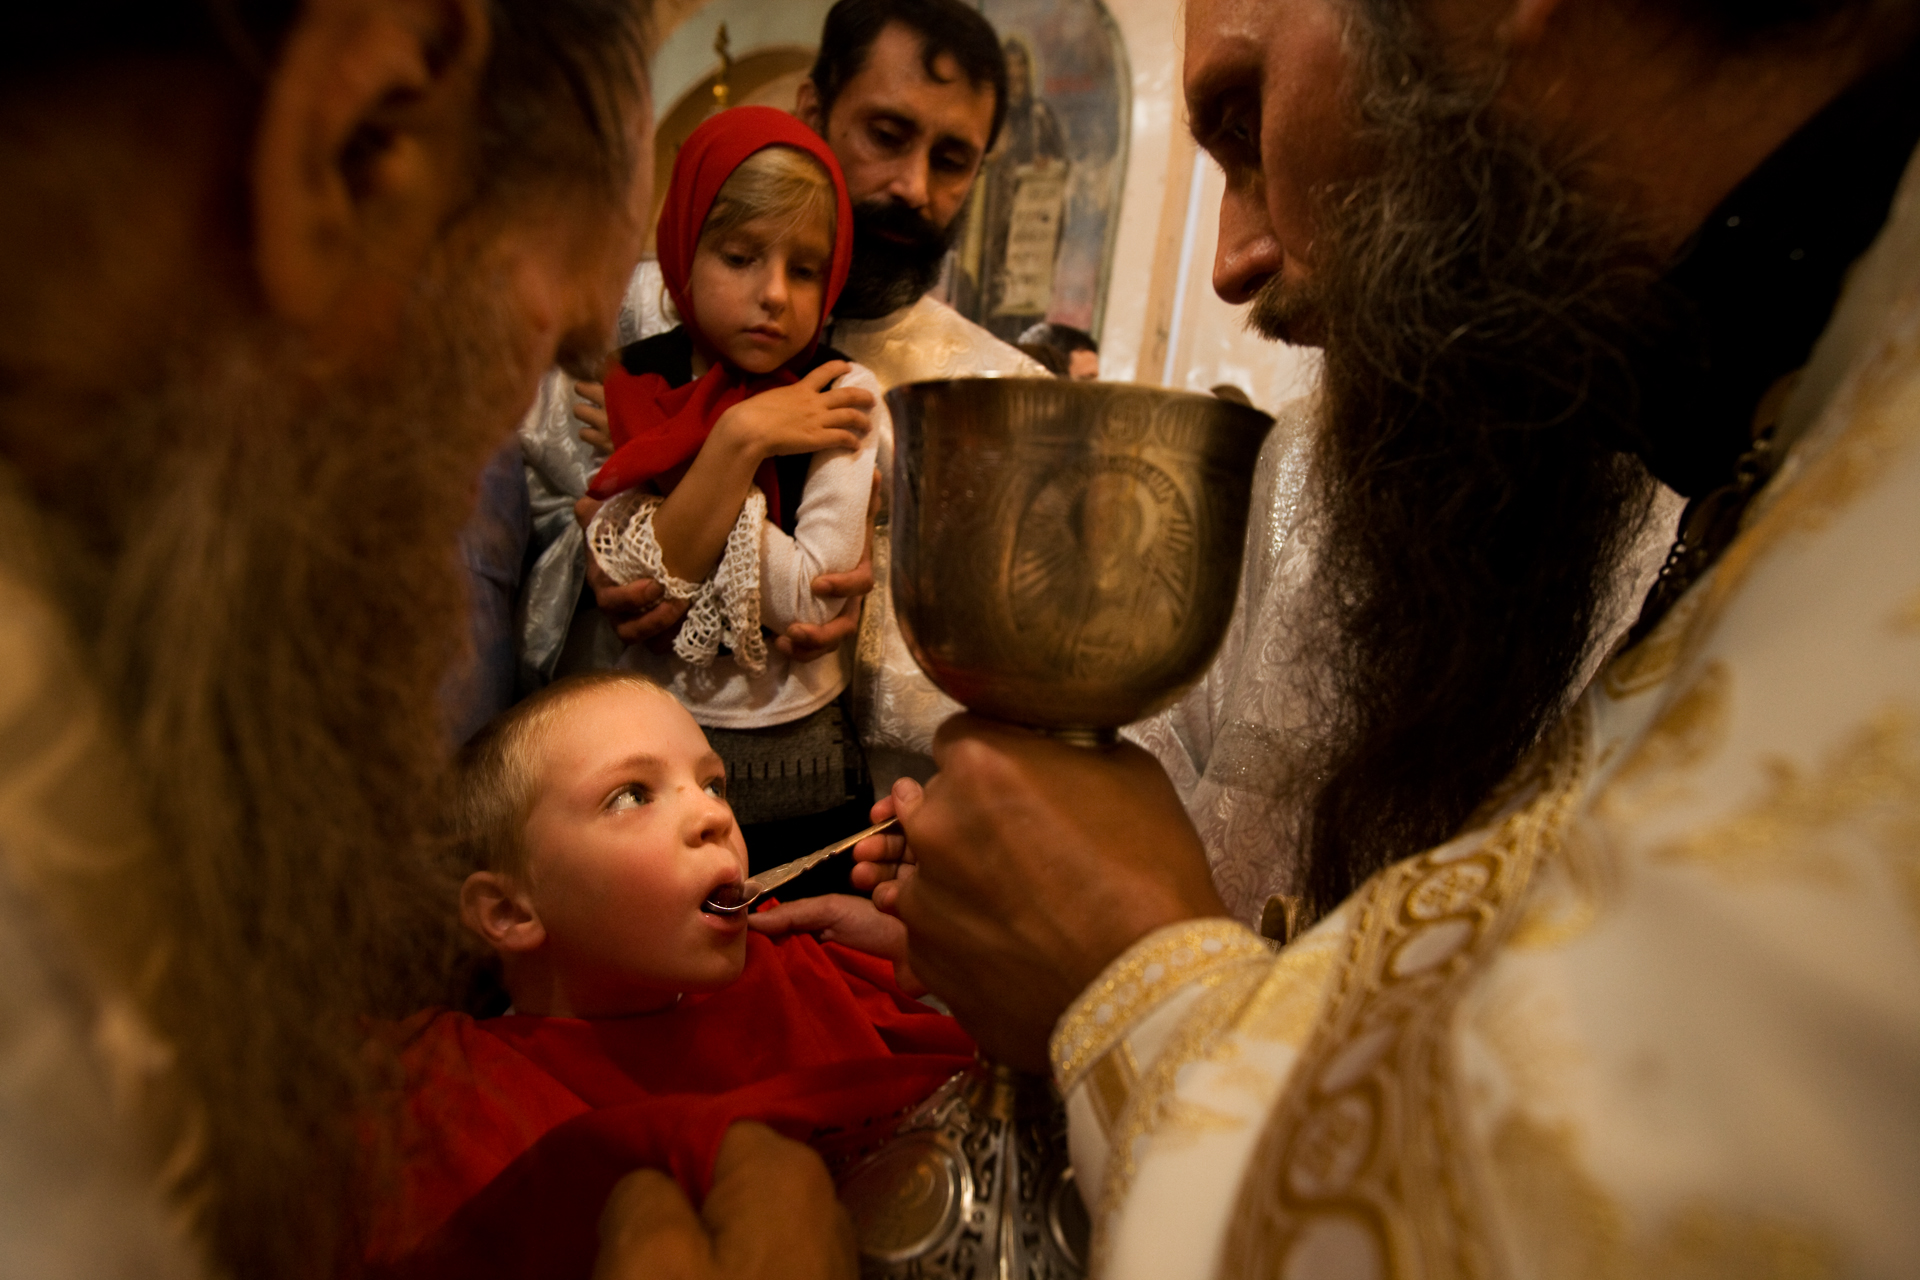  For an early taste of religion, a child receives Communion wine from Father Sergy at the Znamensky Cathedral.  Tyumen, Russia  